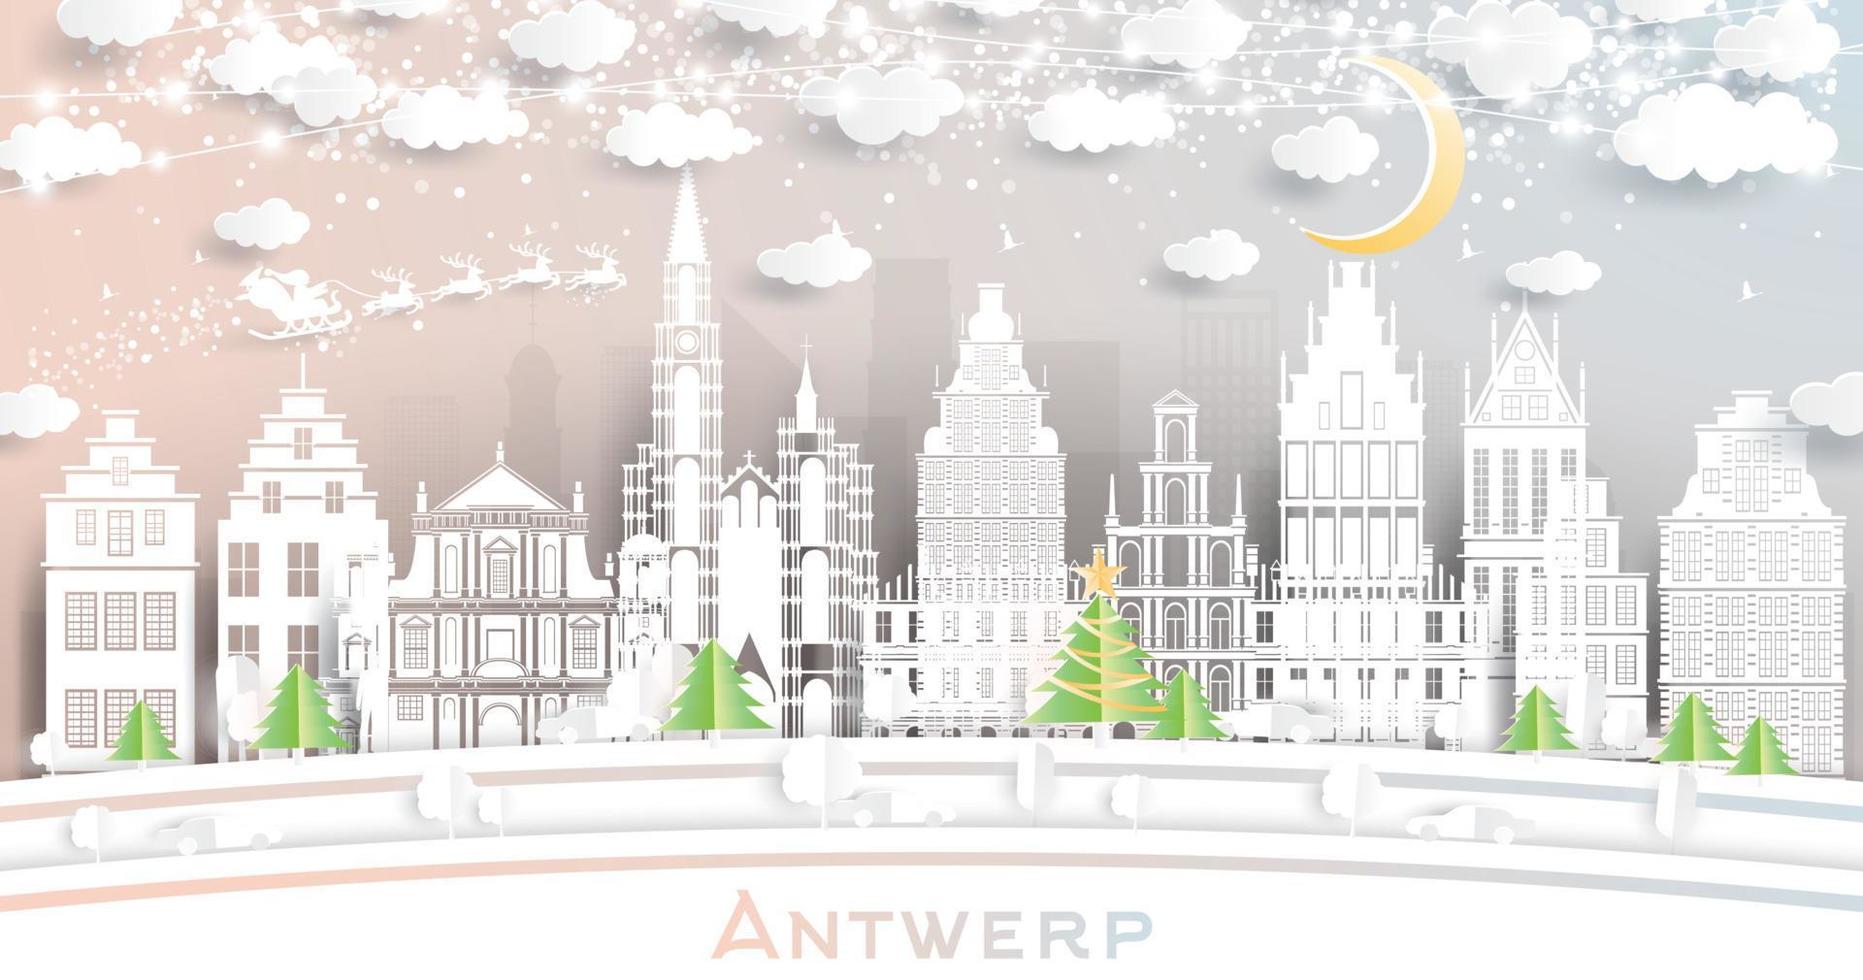 Antwerp Belgium City Skyline in Paper Cut Style with Snowflakes, Moon and Neon Garland. vector